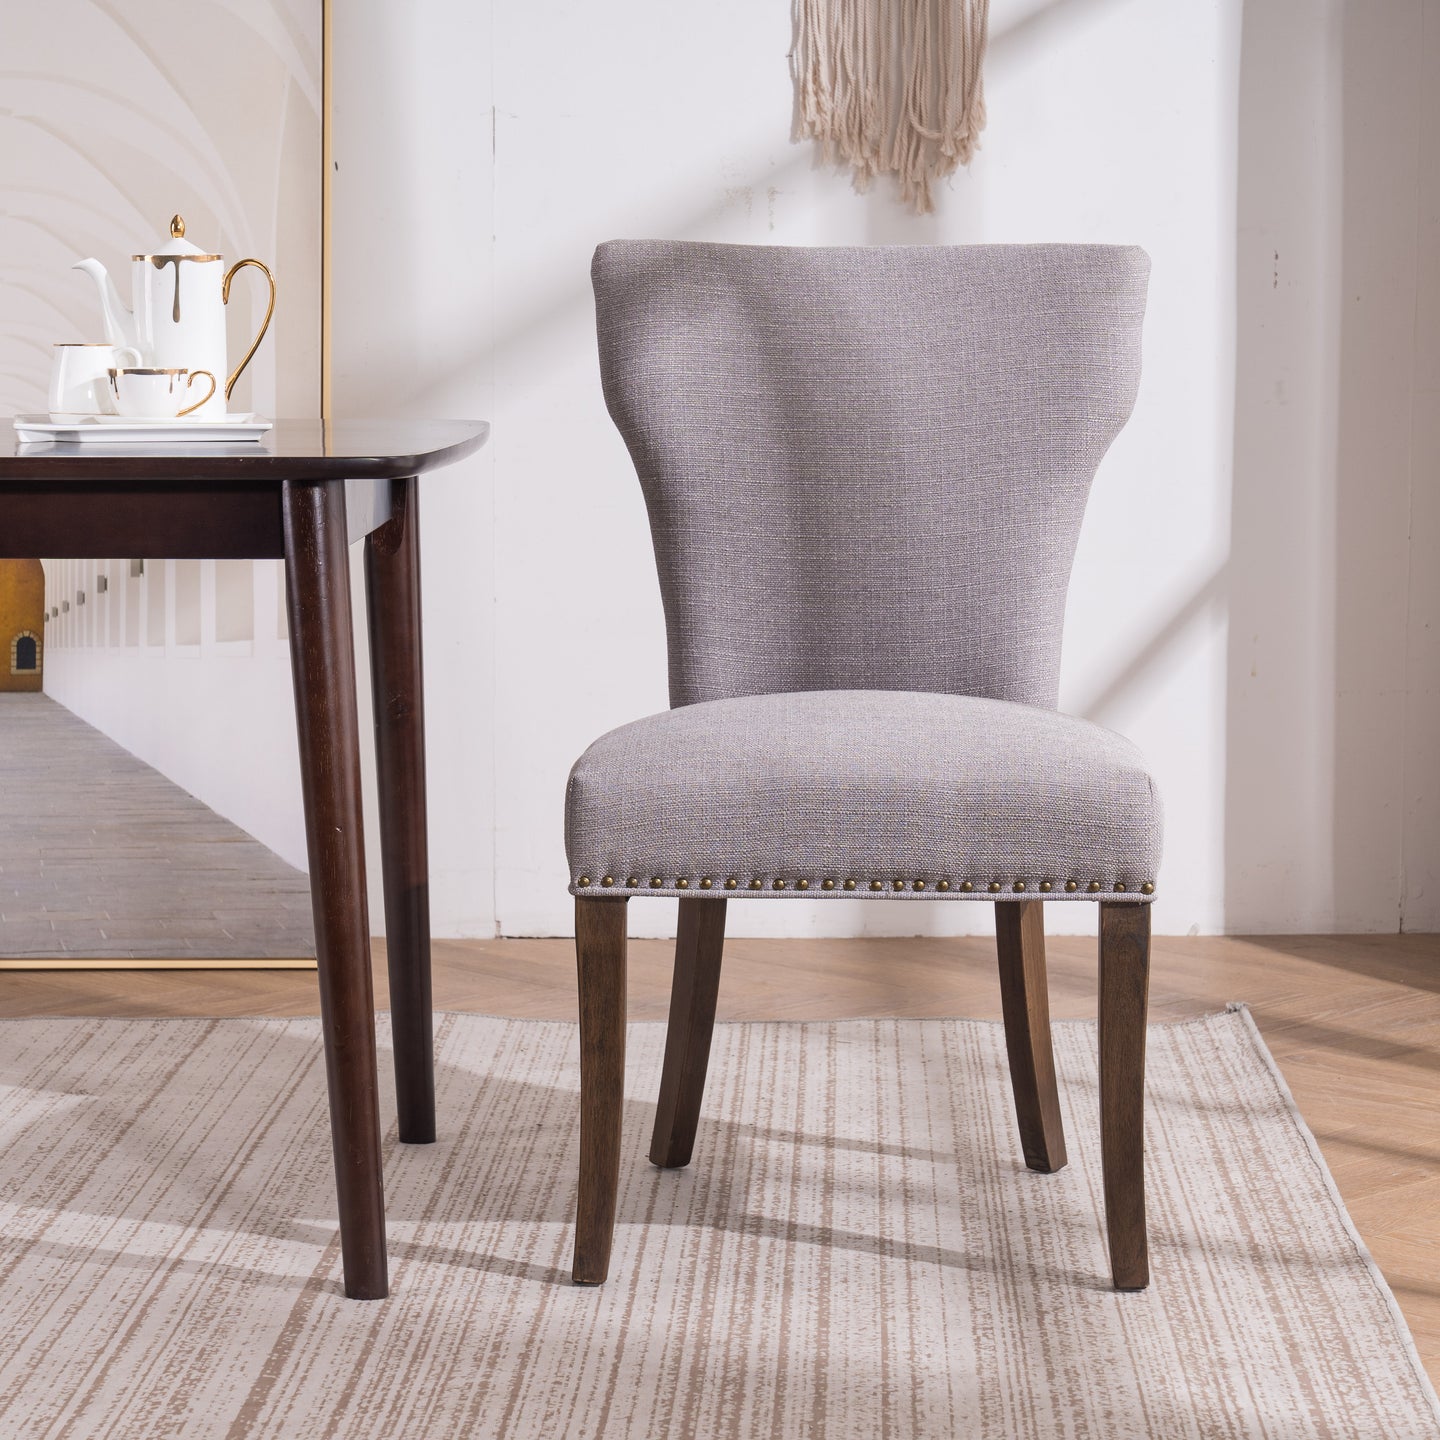 Melvin dining chair